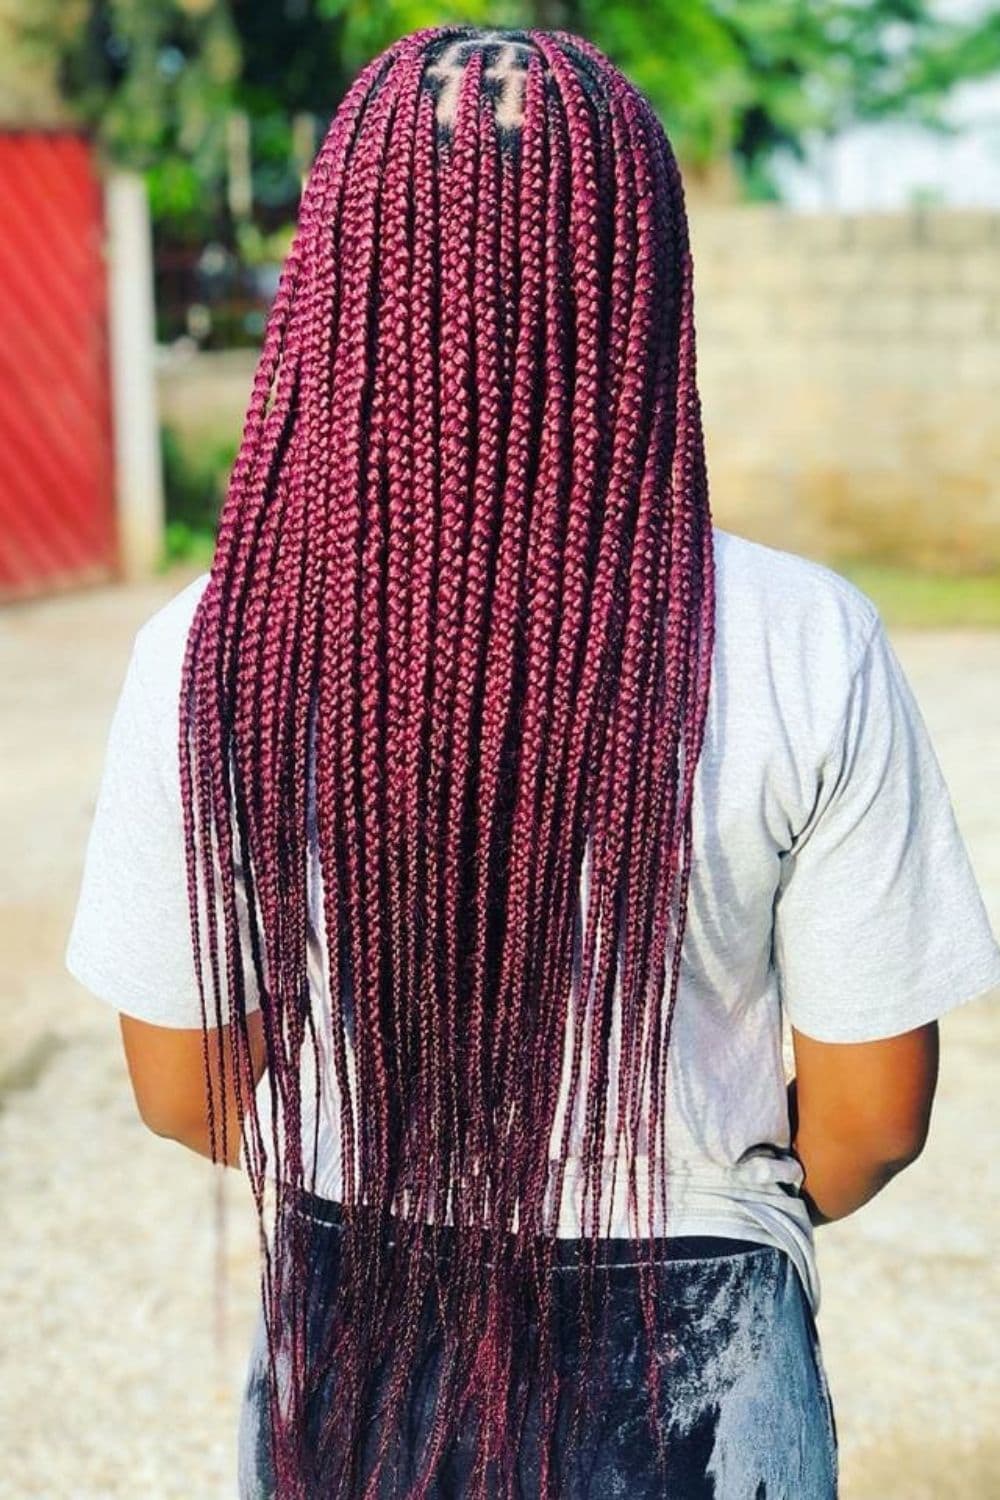 Back of a woman in a white t-shirt with dark maroon knotless braids.